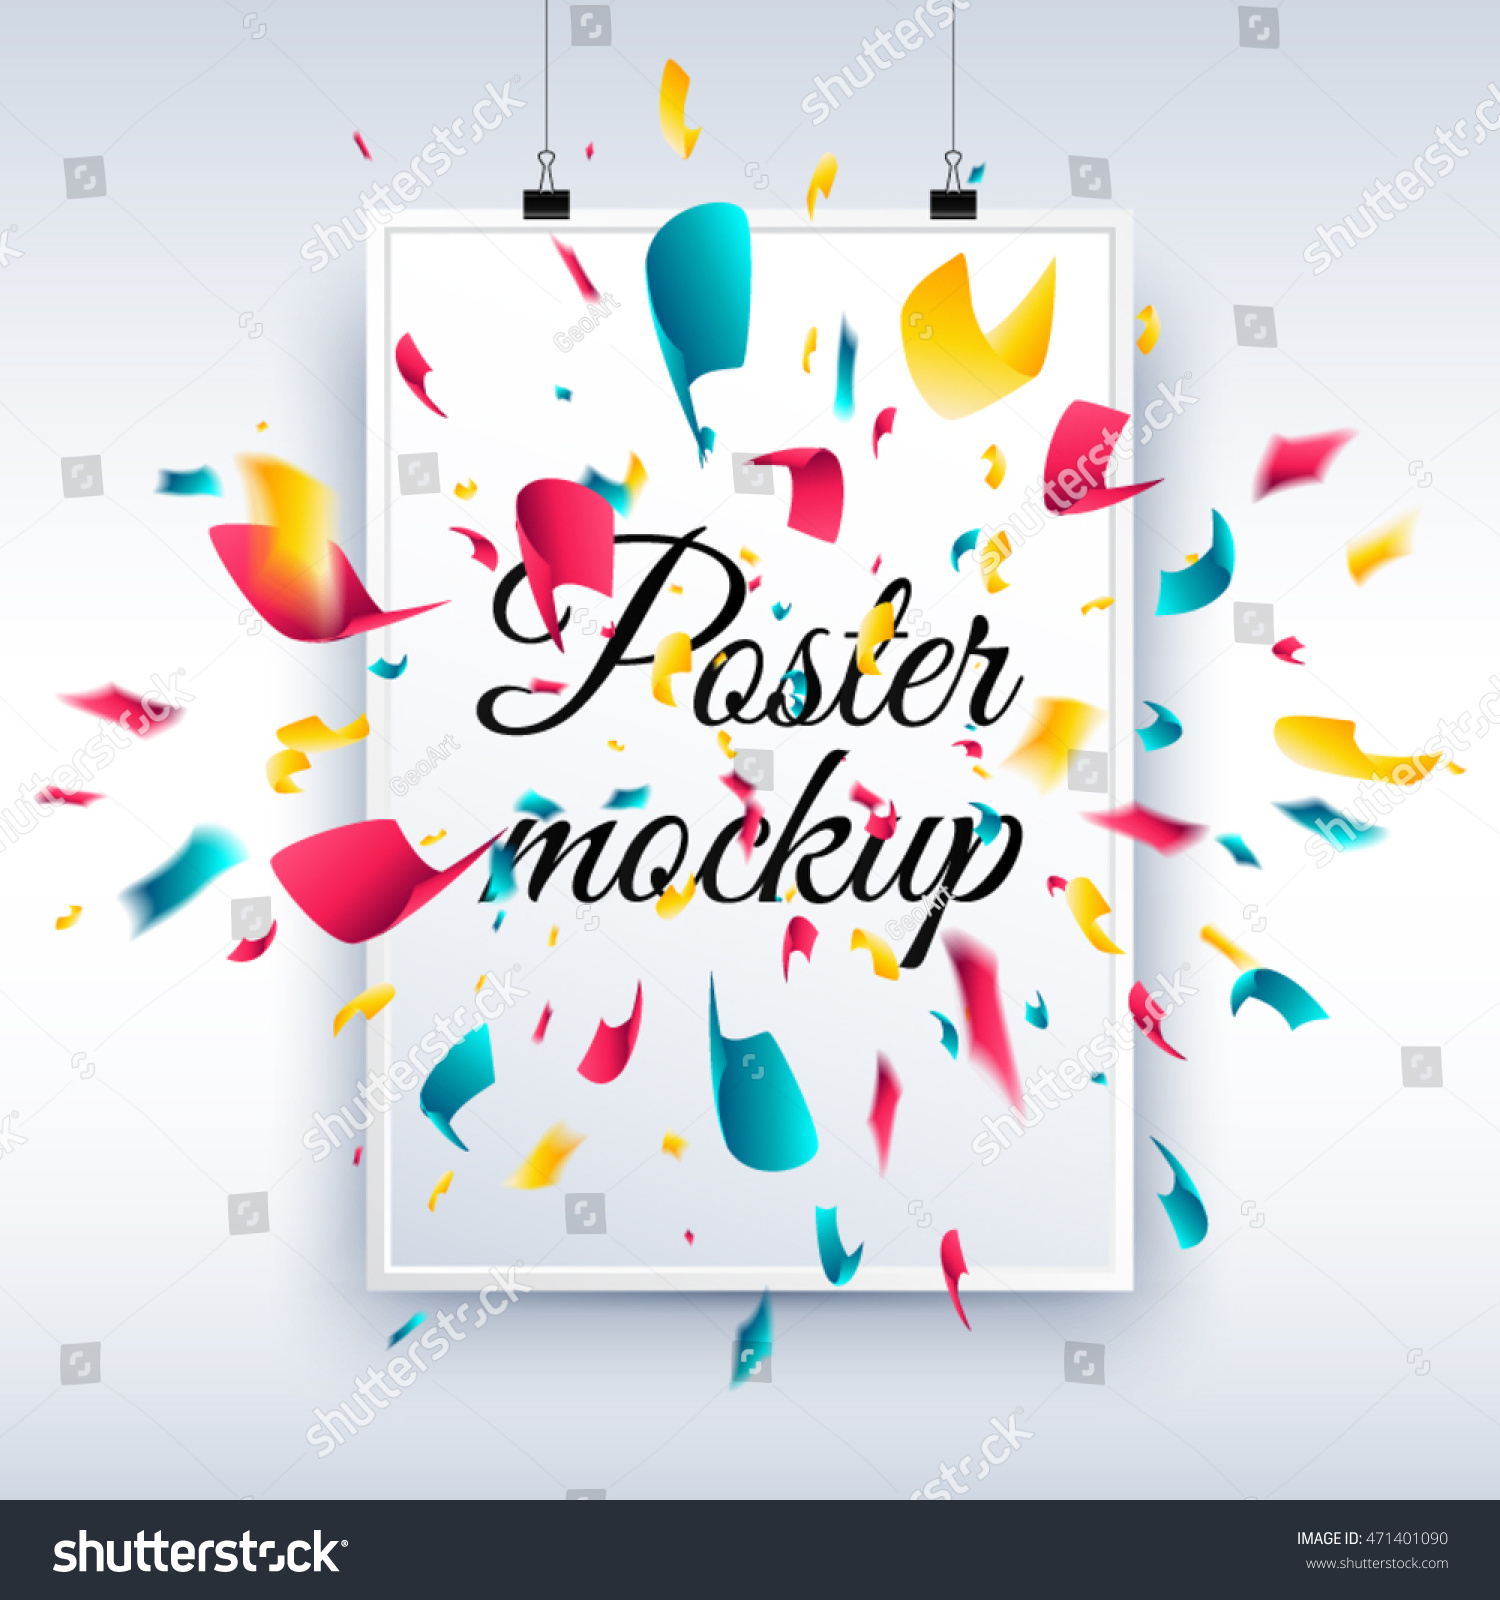 Download Poster Mockup Confetti Explosion On Light Stock Vector Royalty Free 471401090